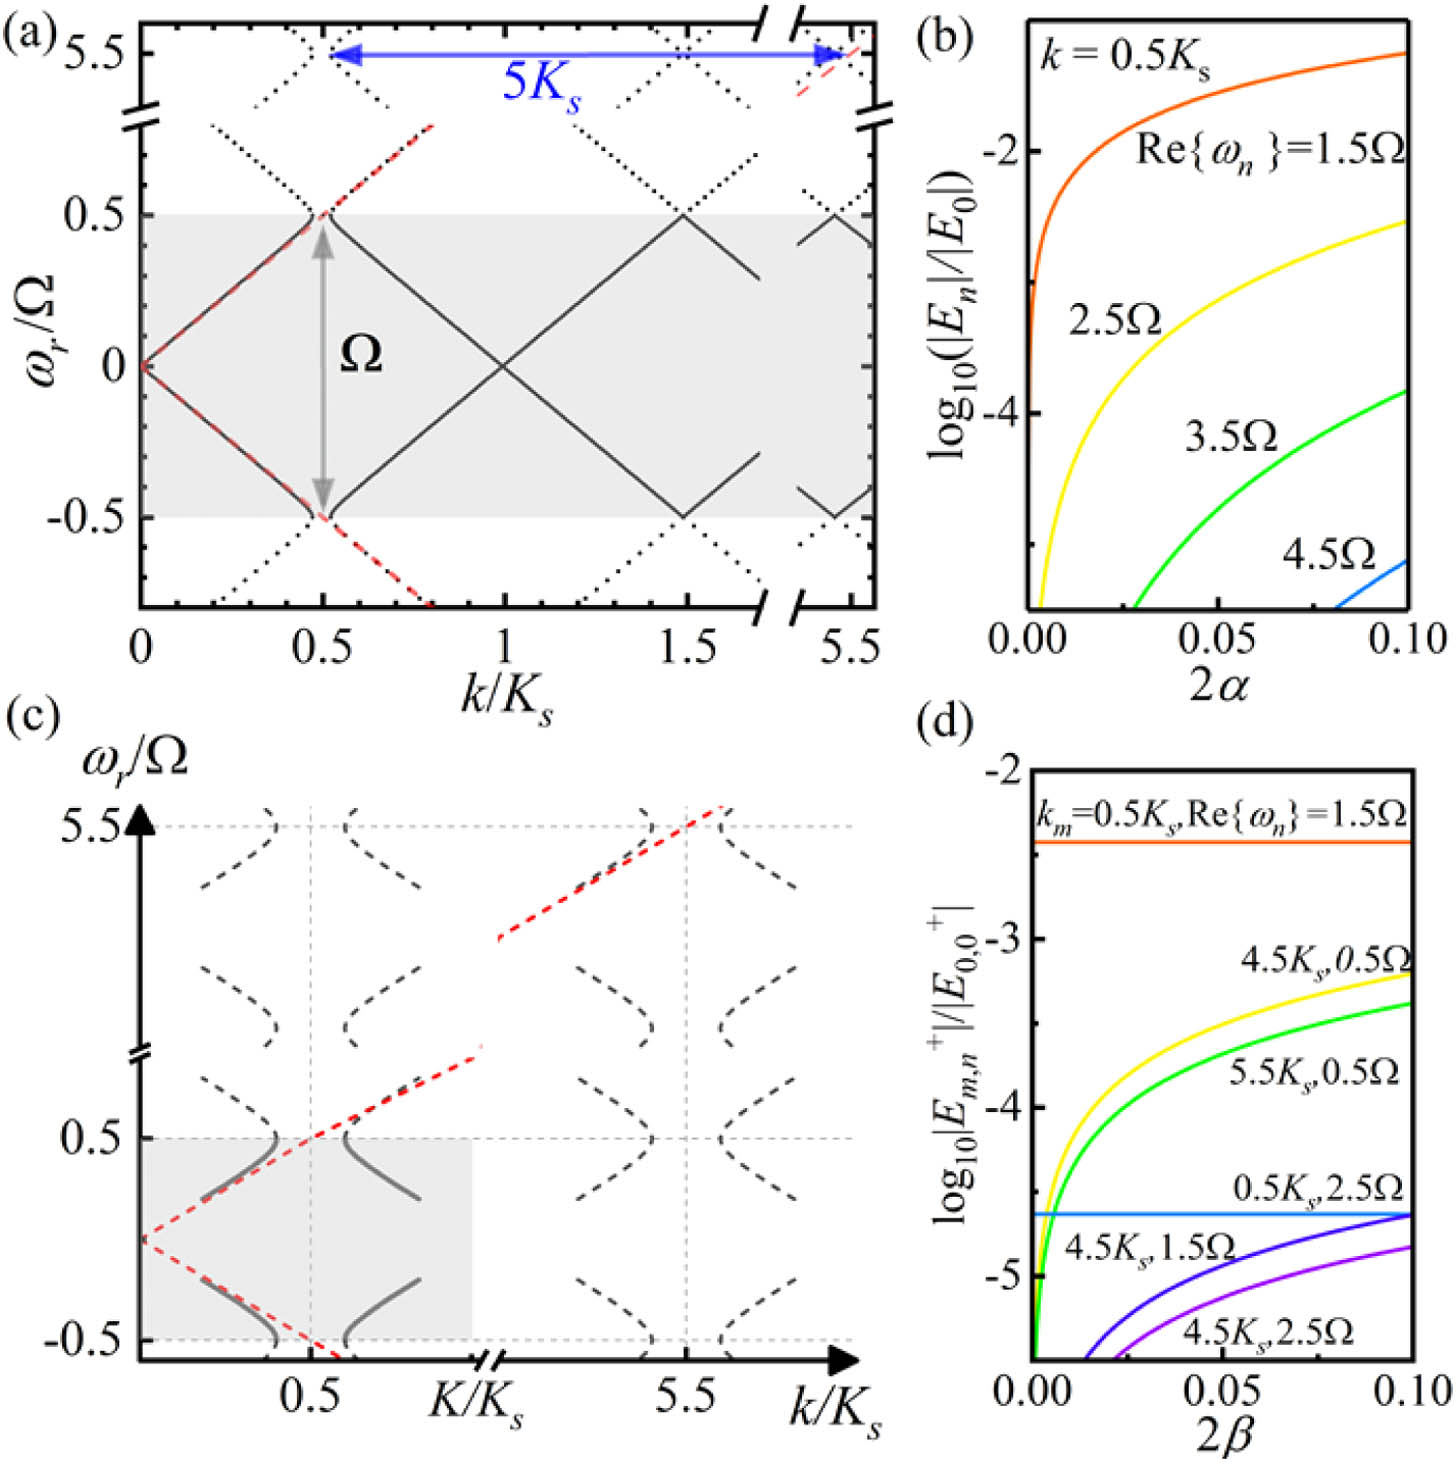 PA in time-varying media and quasi-phase matching for amplification at the high harmonic frequencies. (a) The dispersion relation of the photonic Floquet media with sinusoidally modulated permittivity ε(t)=εs (1+2α cos Ωt), where α=0.1, εs=1.462ε0, and Ks=Ω/vs. The shadowed area shows the first Brillouin zone. The red dashed lines indicate the light lines and the blue arrow shows the phase mismatching between the inverted bandgap and the light line. (b) The amplitude of the high harmonic modes as the modulation strength α increases. (c) By introducing spatial modulation with permittivity ε(x,t)=εs(1+2α cos Ωt+2β cos Kx), the inverted bandgaps generate copies of themselves by shifting K. (d) The amplitude of the high harmonic modes as the modulation strength β increases, where α=0.01. Note that the corresponding eigenfrequencies of the eigenstates shown in (b) and (d) are complex numbers.